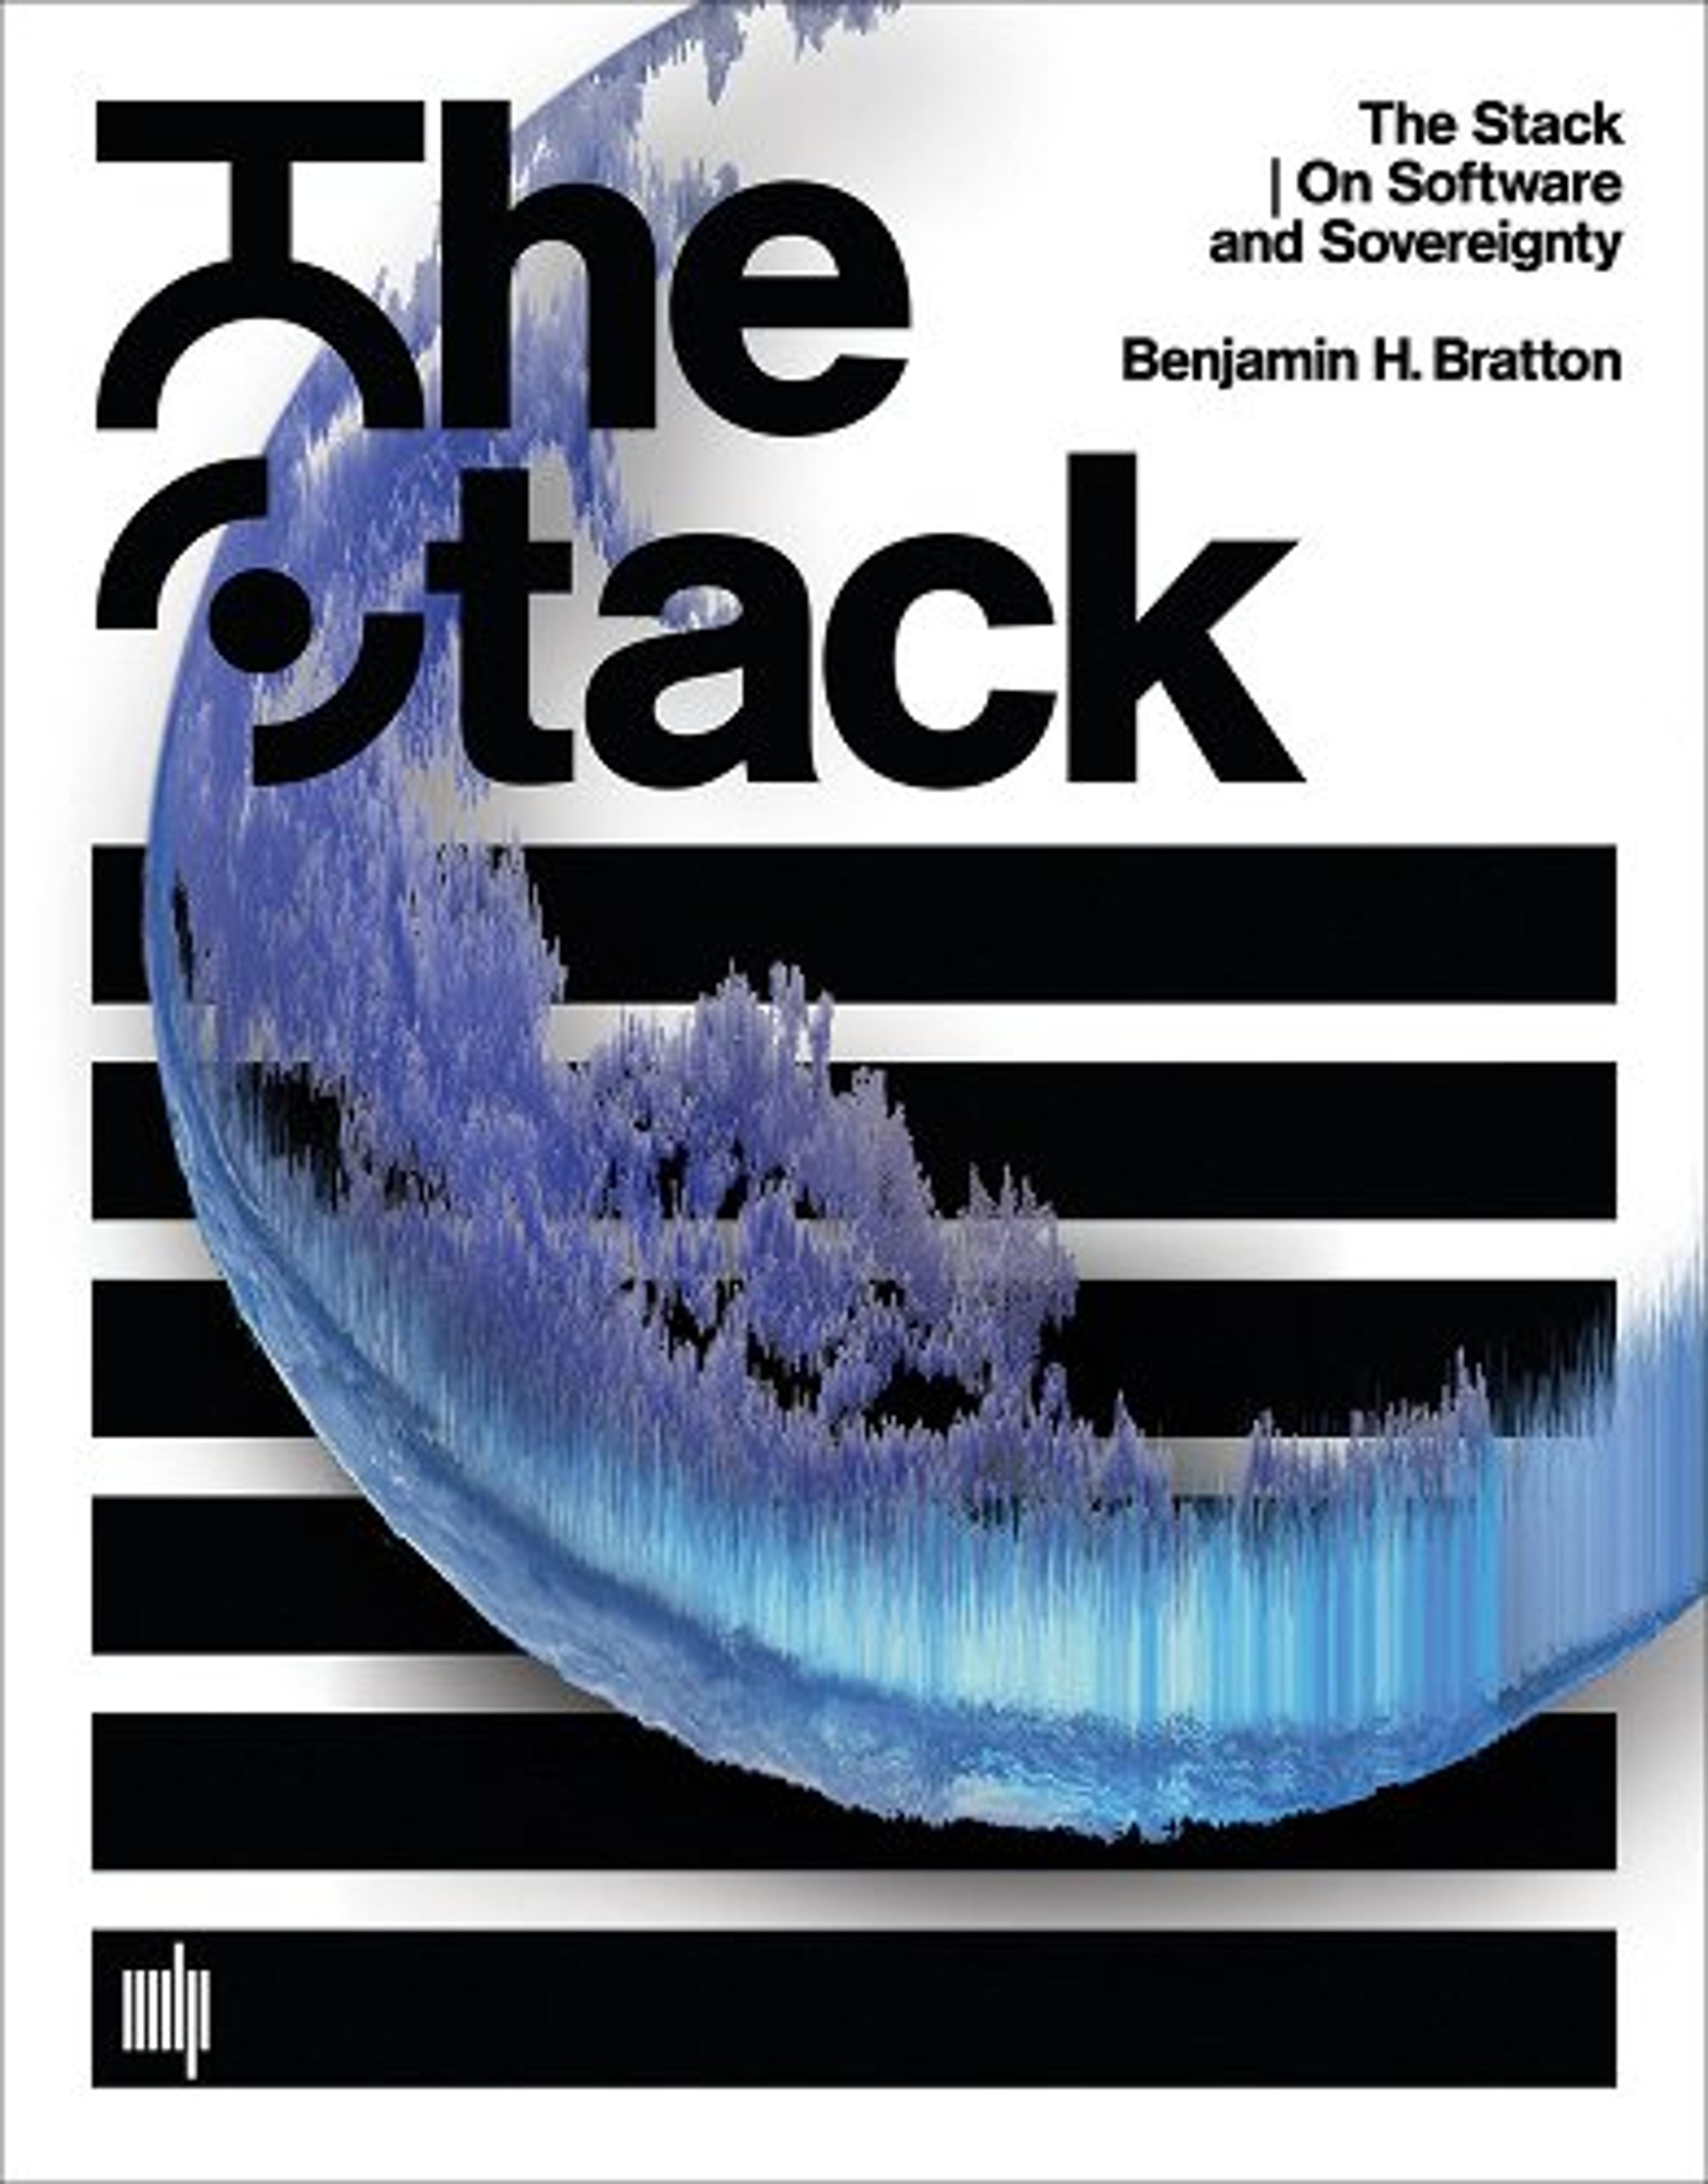 The Stack: On Software and Sovereignty a book by Benjamin H. Bratton